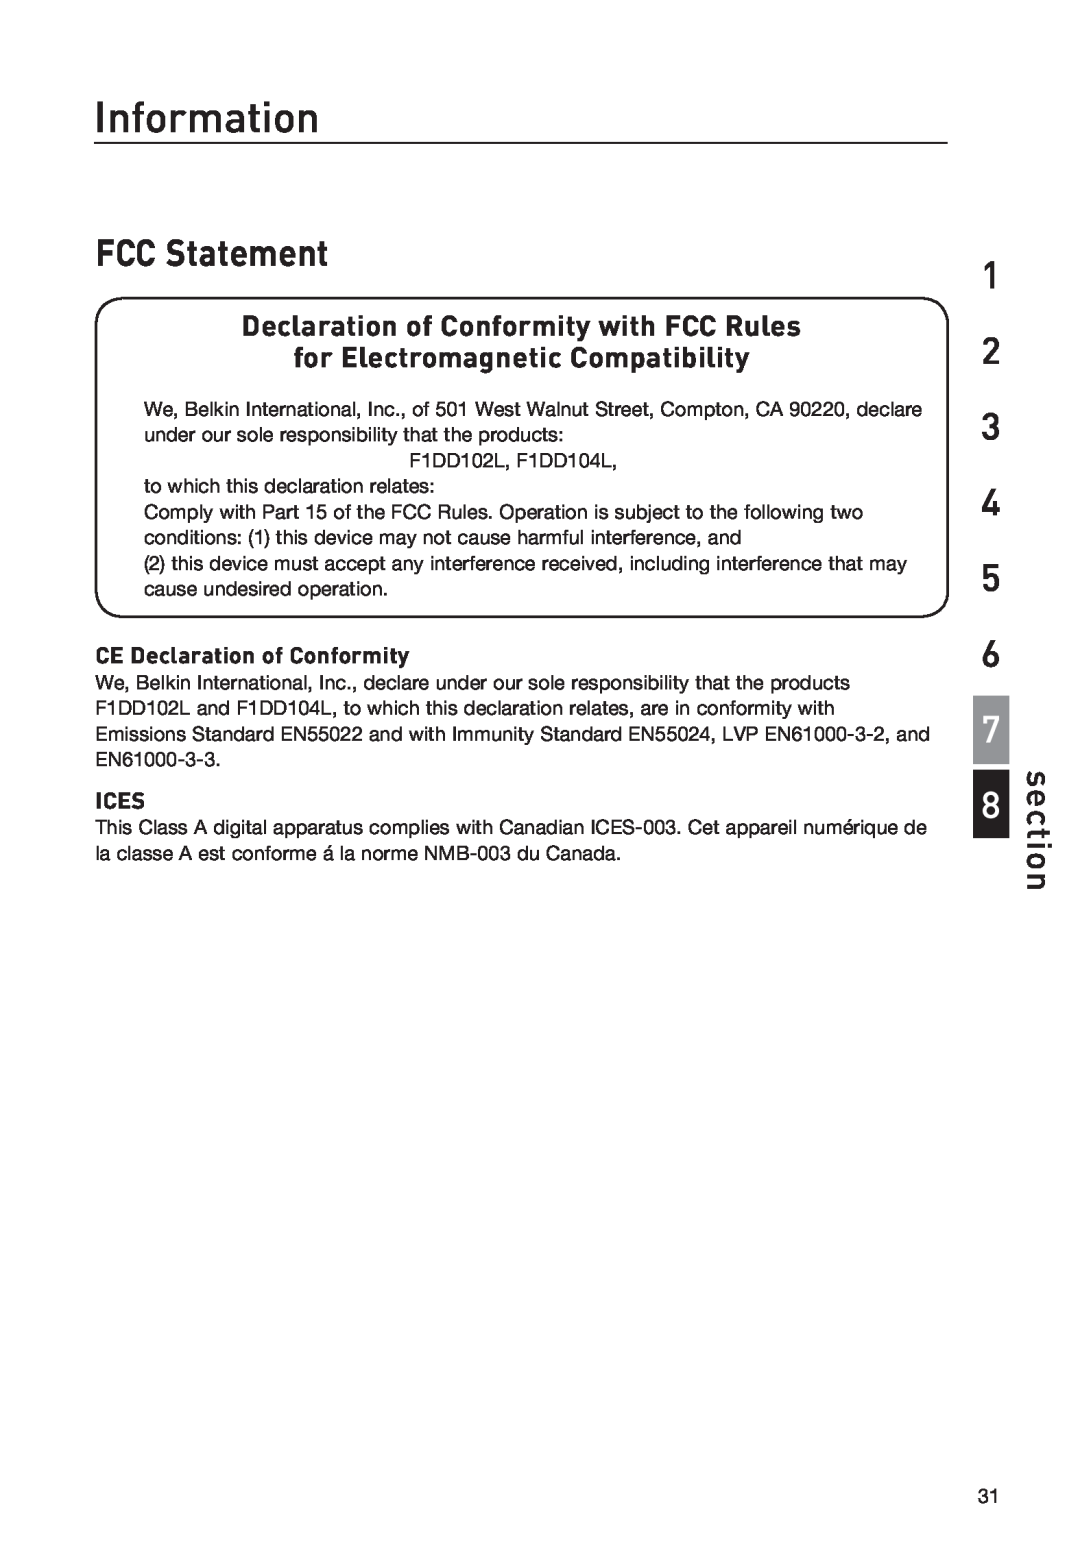 Belkin F1DD102LEA Information, FCC Statement, Declaration of Conformity with FCC Rules, for Electromagnetic Compatibility 